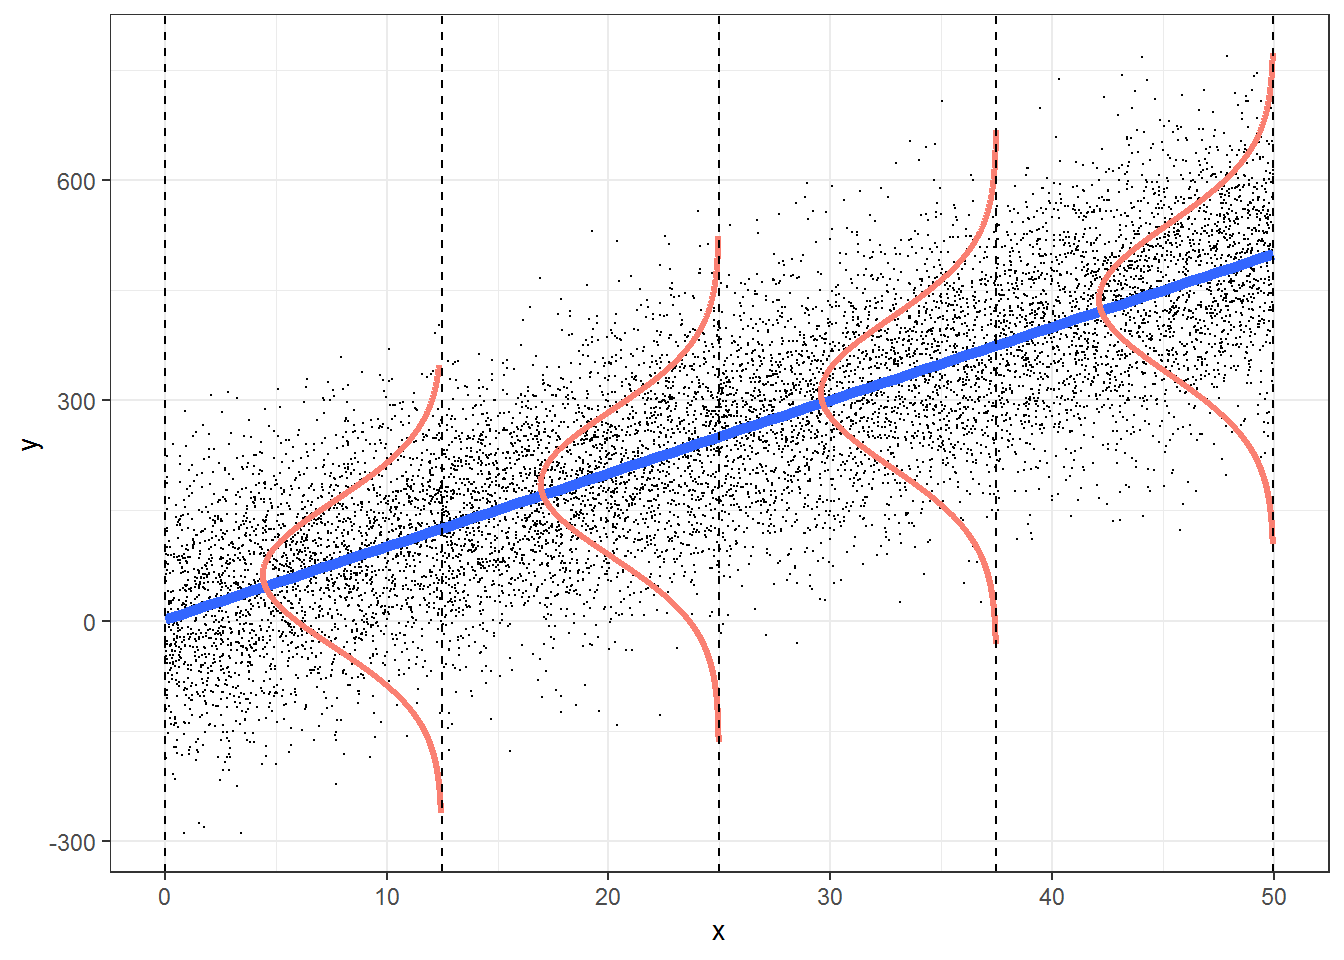 Figure illustrating the assumptions associated with simple linear regression. This figure was produced using modified code from an answer on stackoverflow by Roback & Legler (2021) (https://bookdown.org/roback/bookdown-bysh/).